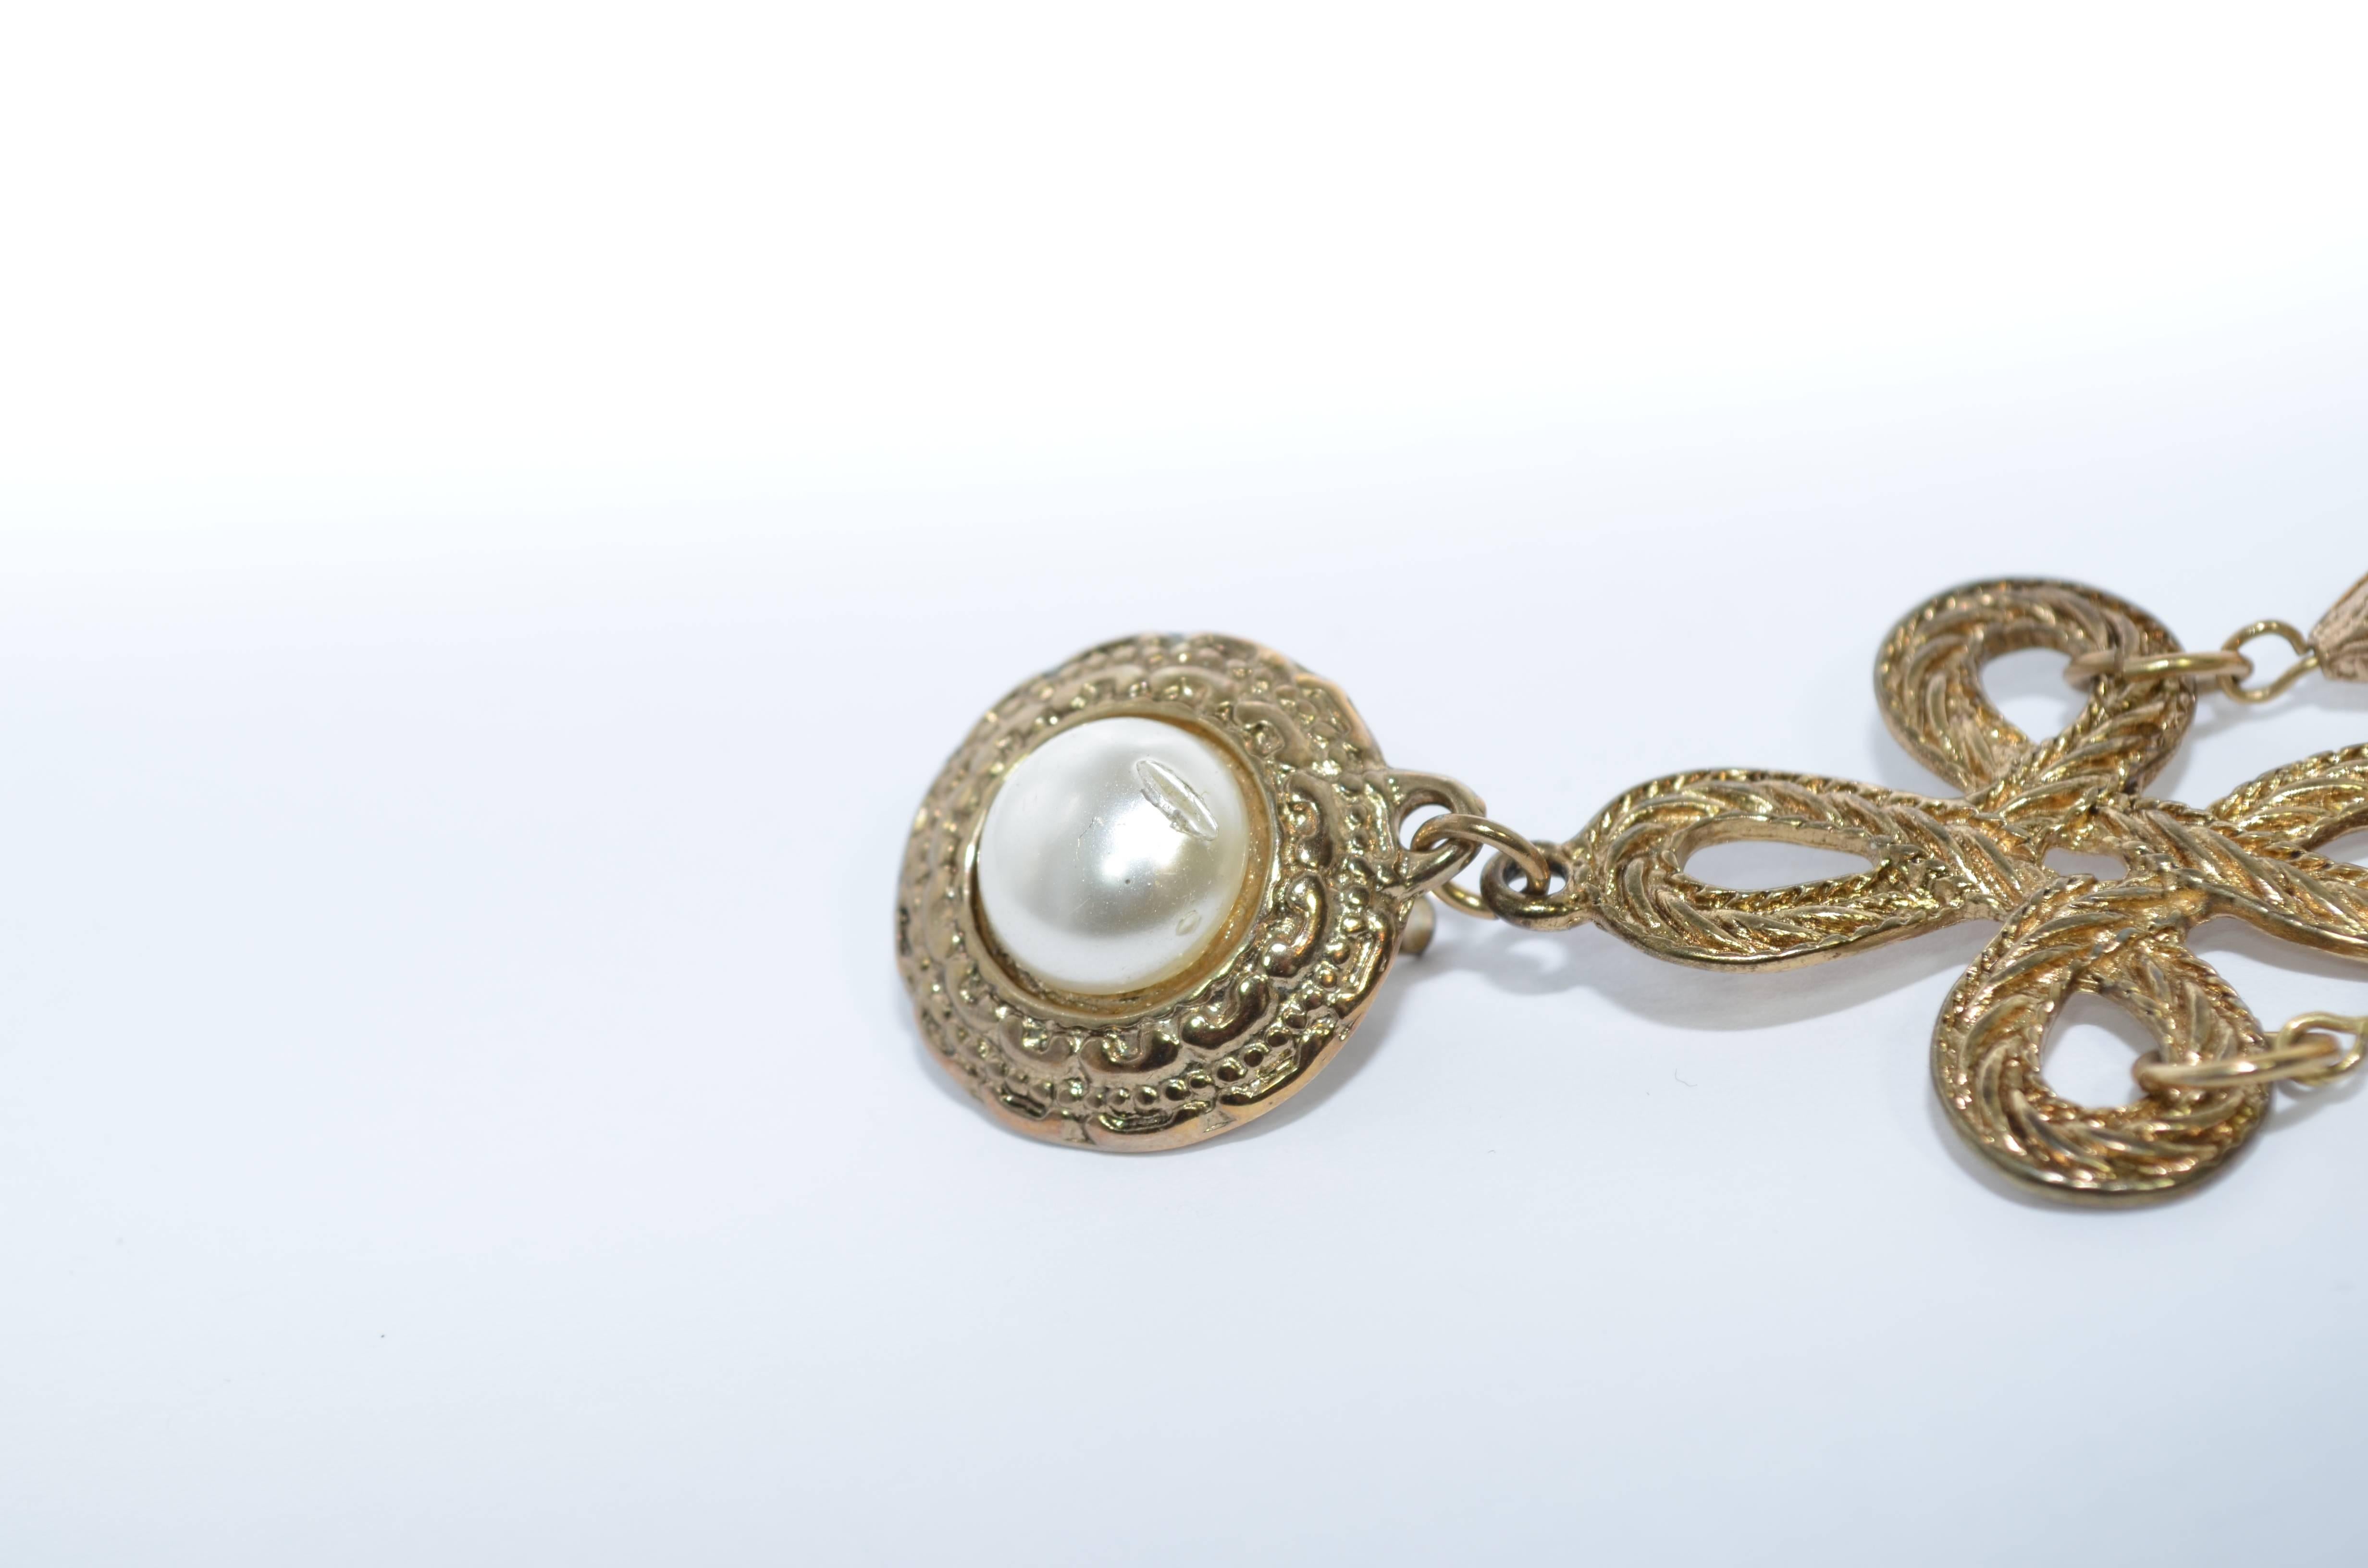 Earrings are featured in an antique gold hardware with 3 dangling pearls and a pearl center stud. Clip on earrings with a baroque style. Length from the clip stud to the longest dangling pearl measures 4.25 inches. One pearl stud has some minor